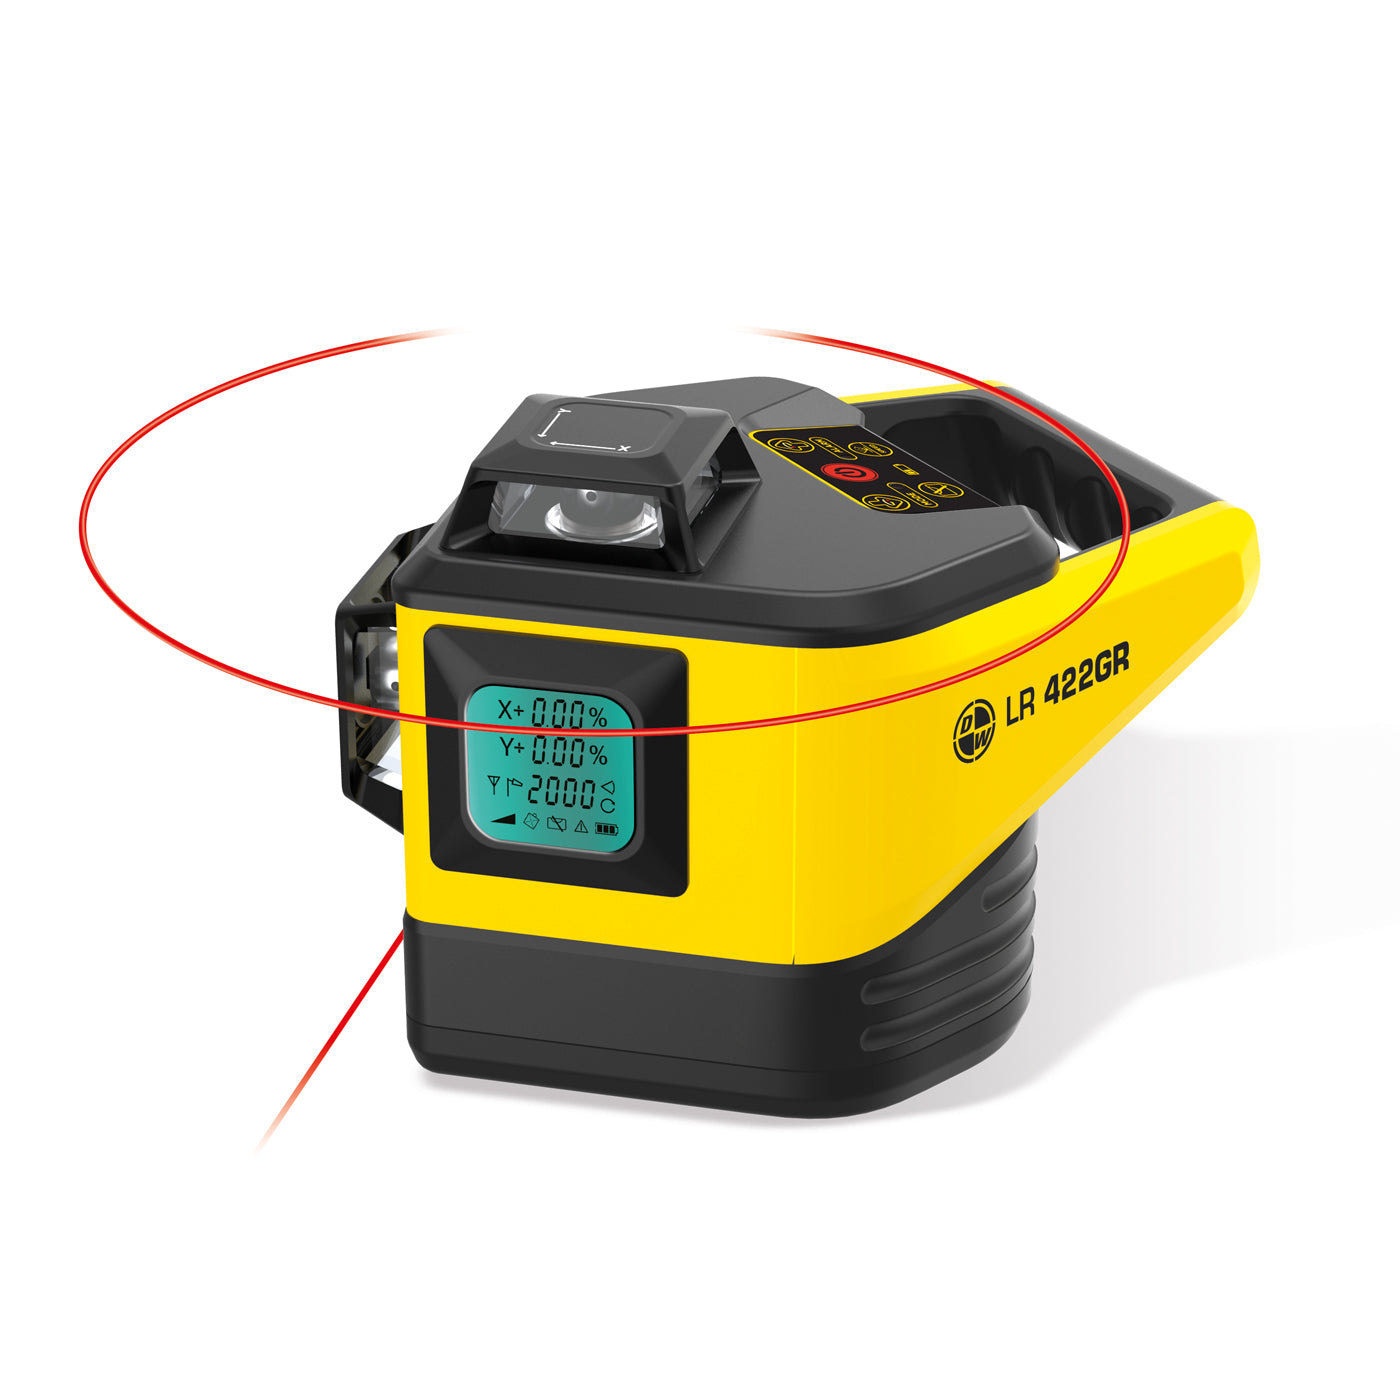 SitePro 27-LR422GR Dual Dial-In Graded Rotary Laser